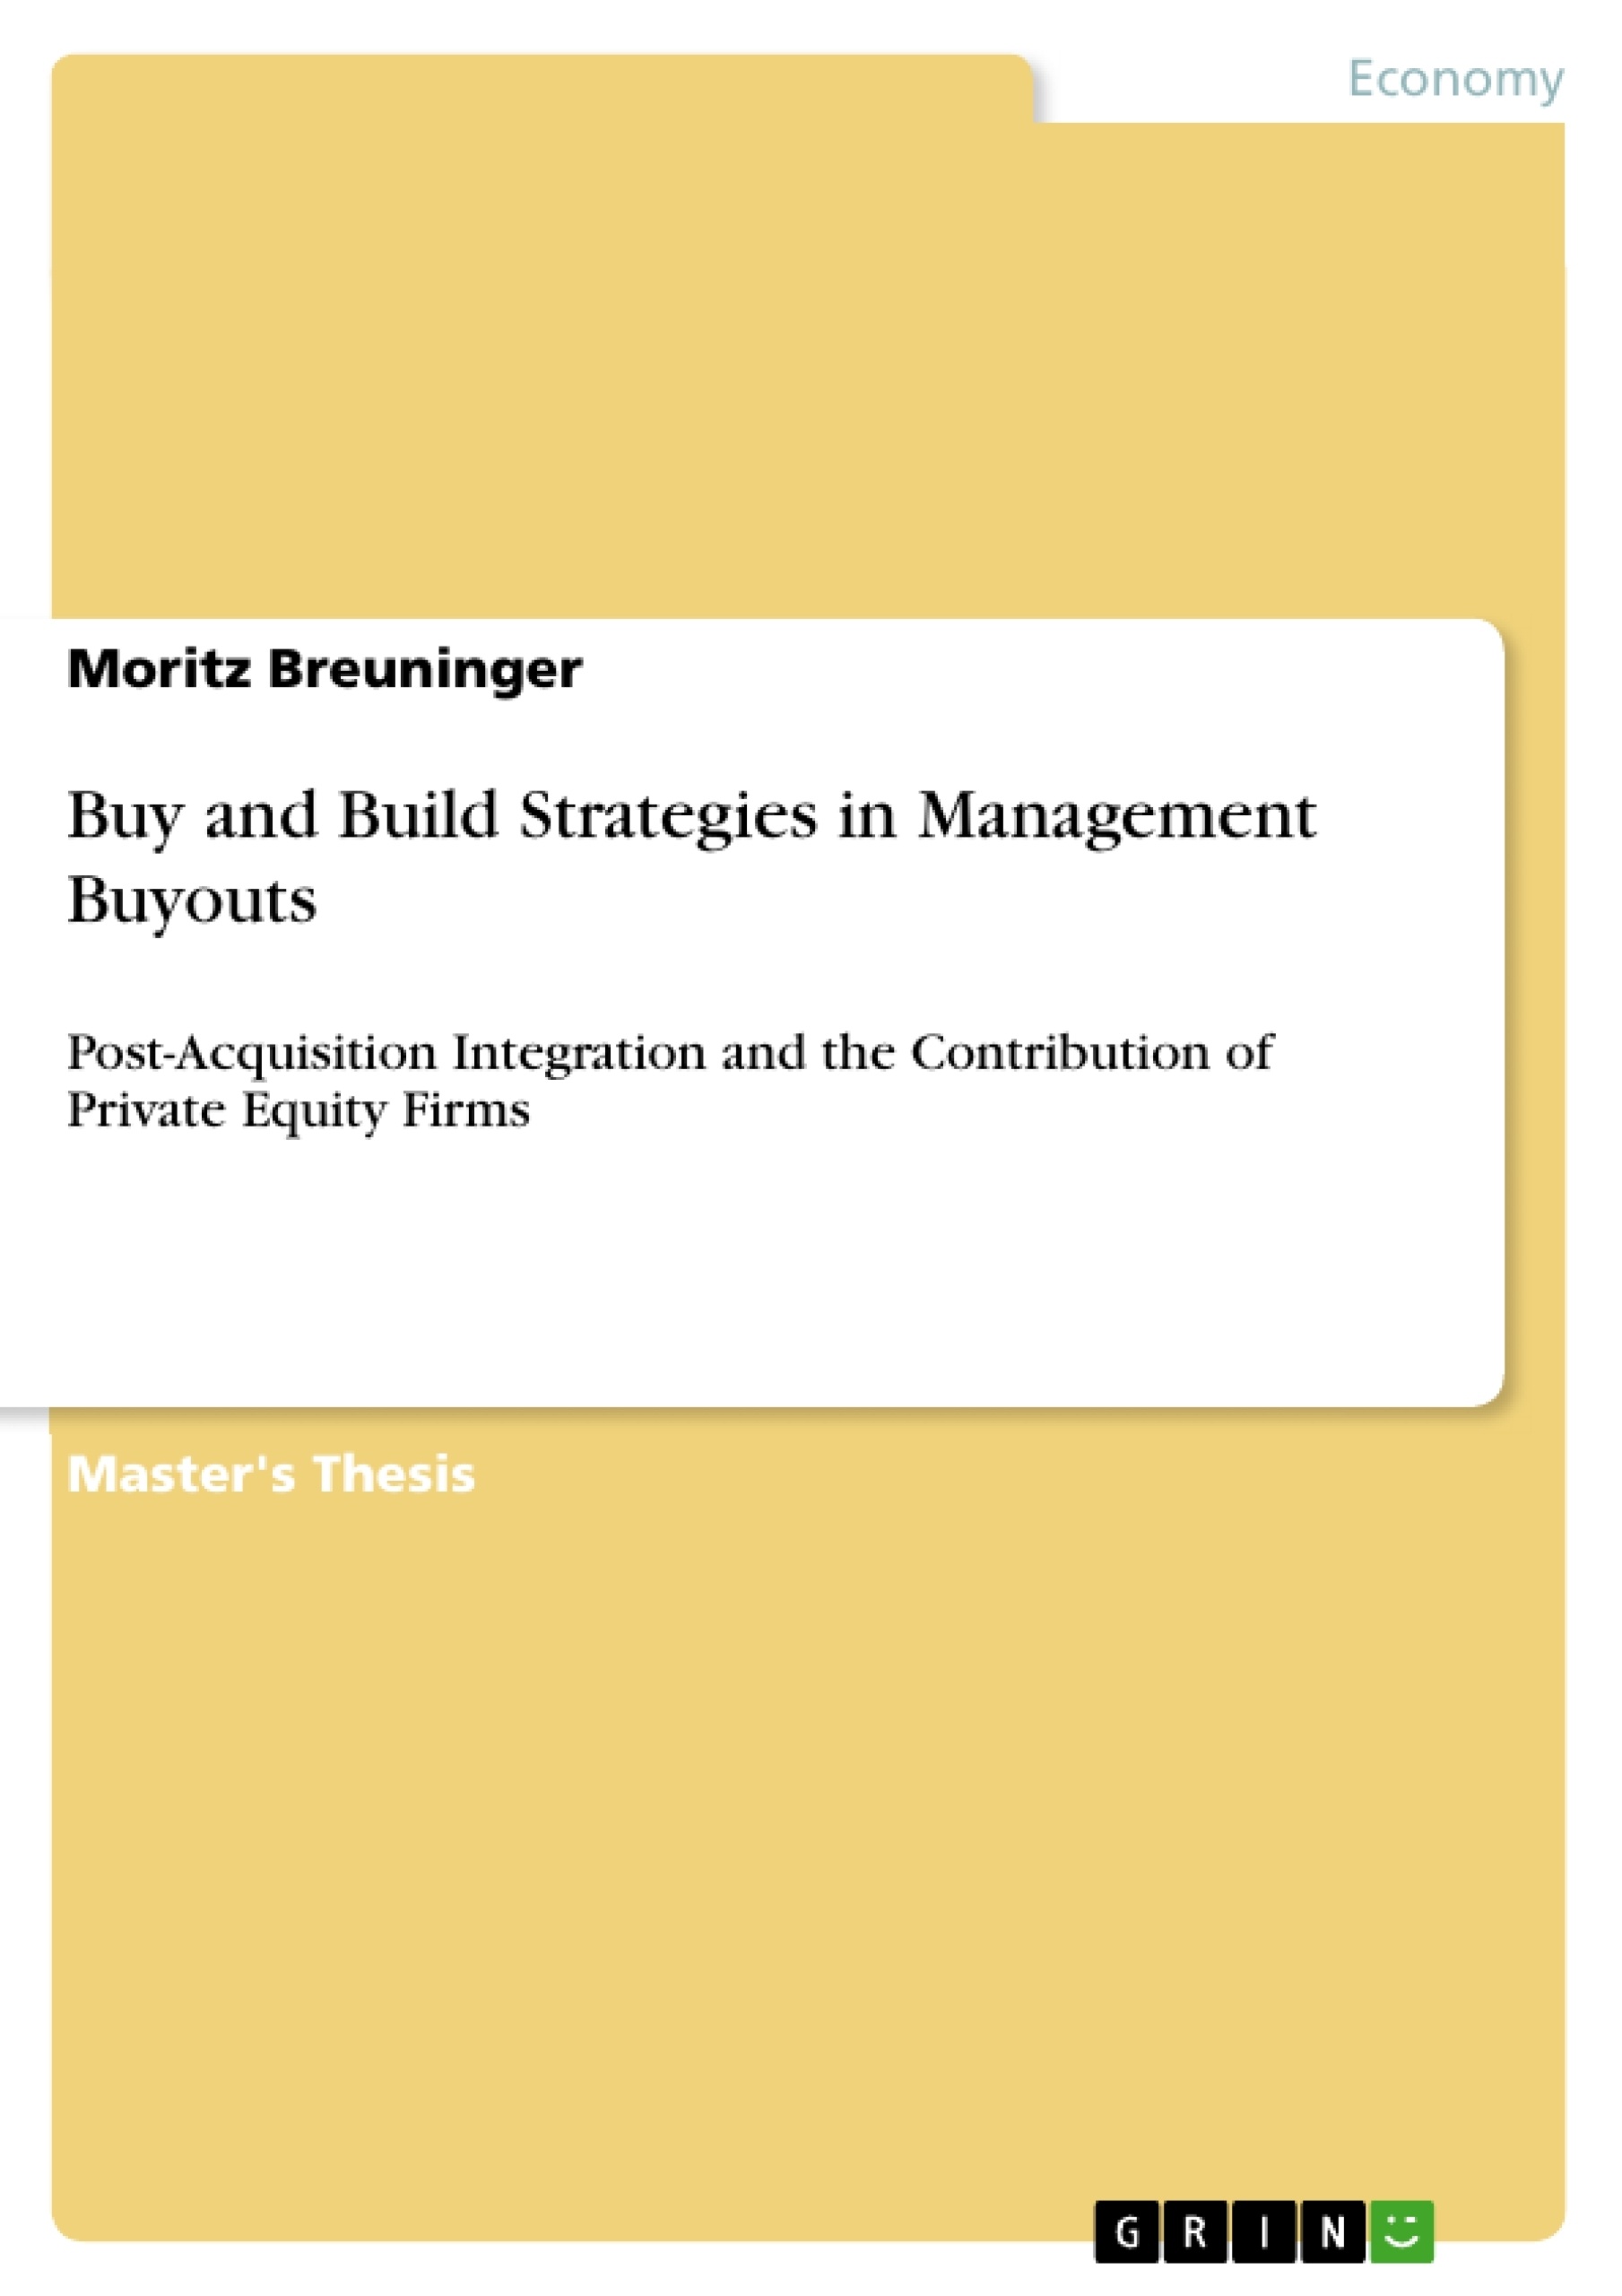 Título: Buy and Build Strategies in Management Buyouts